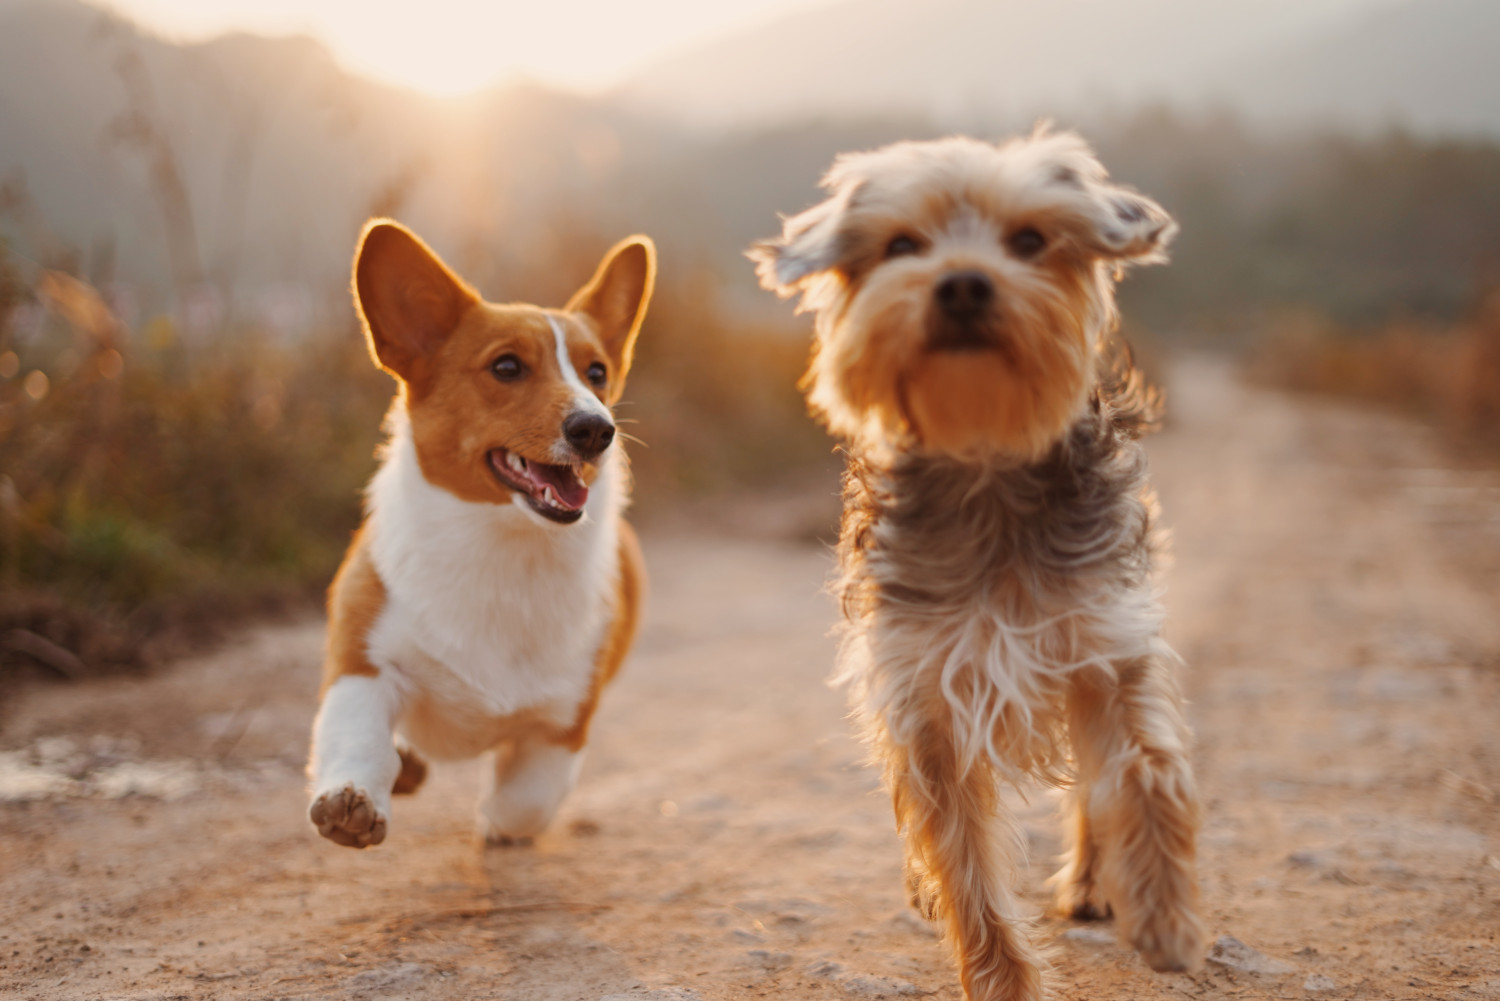 photo of two dogs running